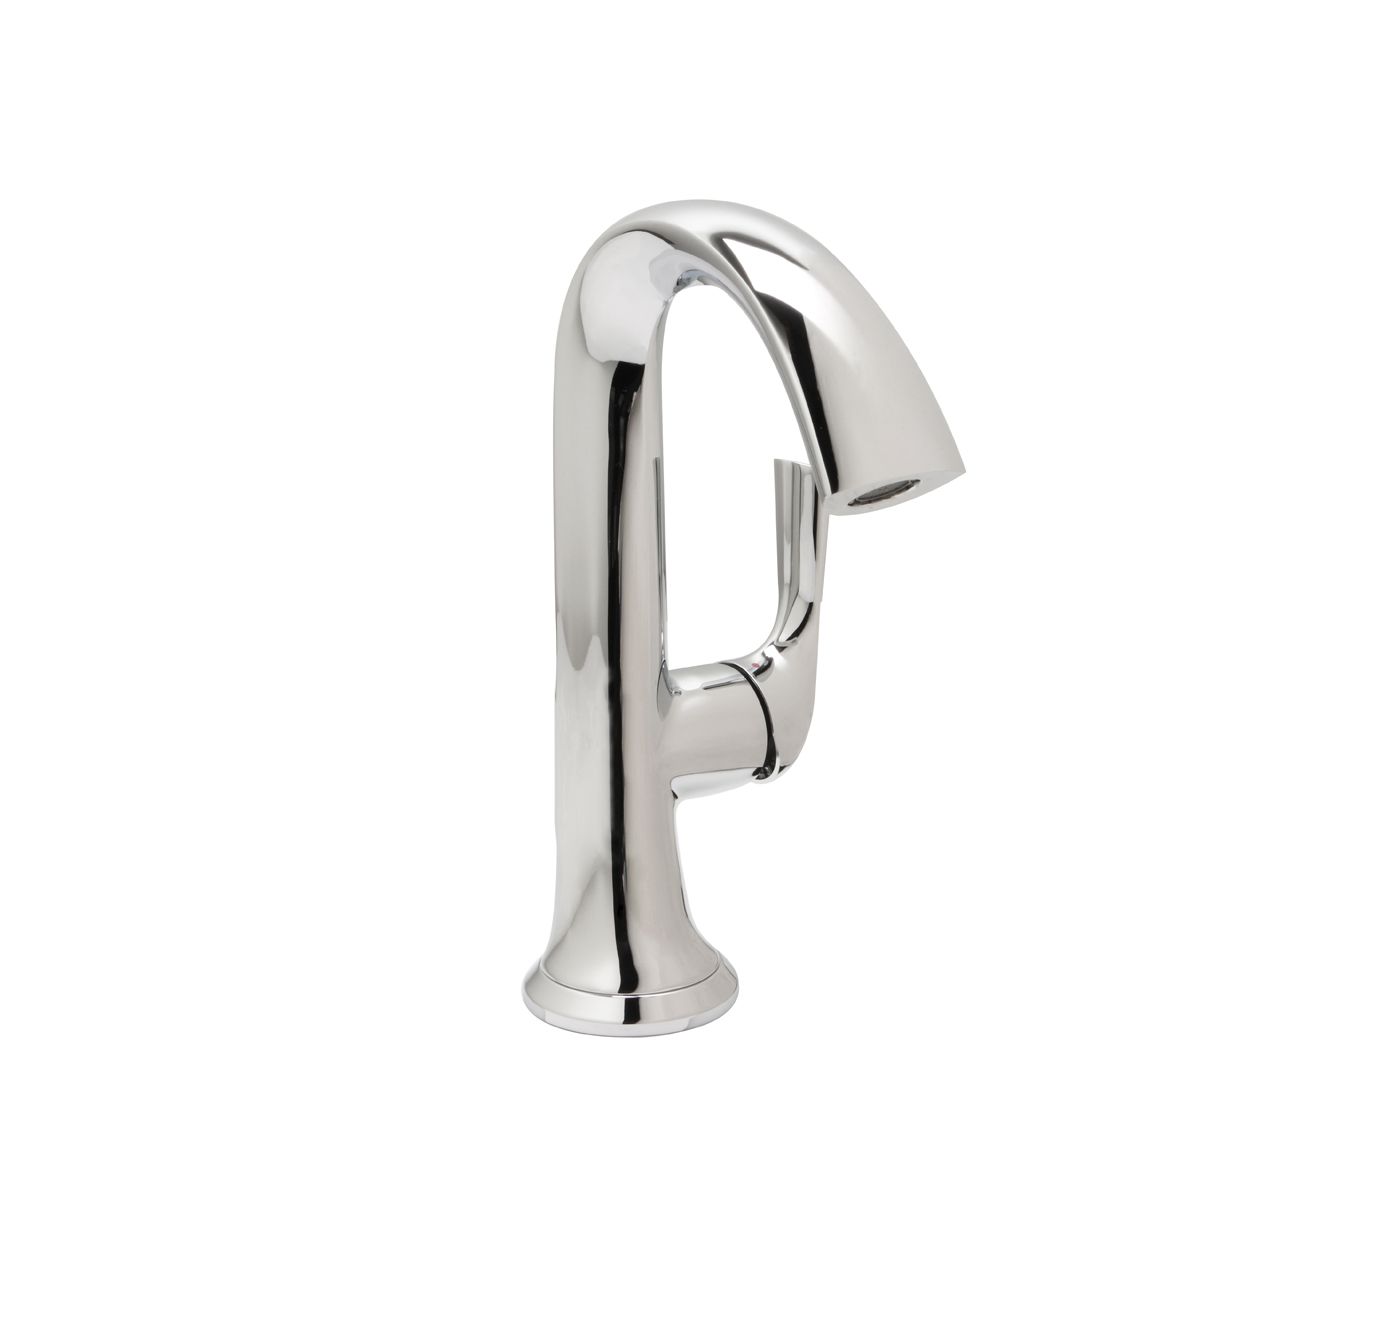 Huntington Brass Joy PVD Satin Nickel Single Control Lavatory Faucet With Push Style Pop-Up Drain Assembly